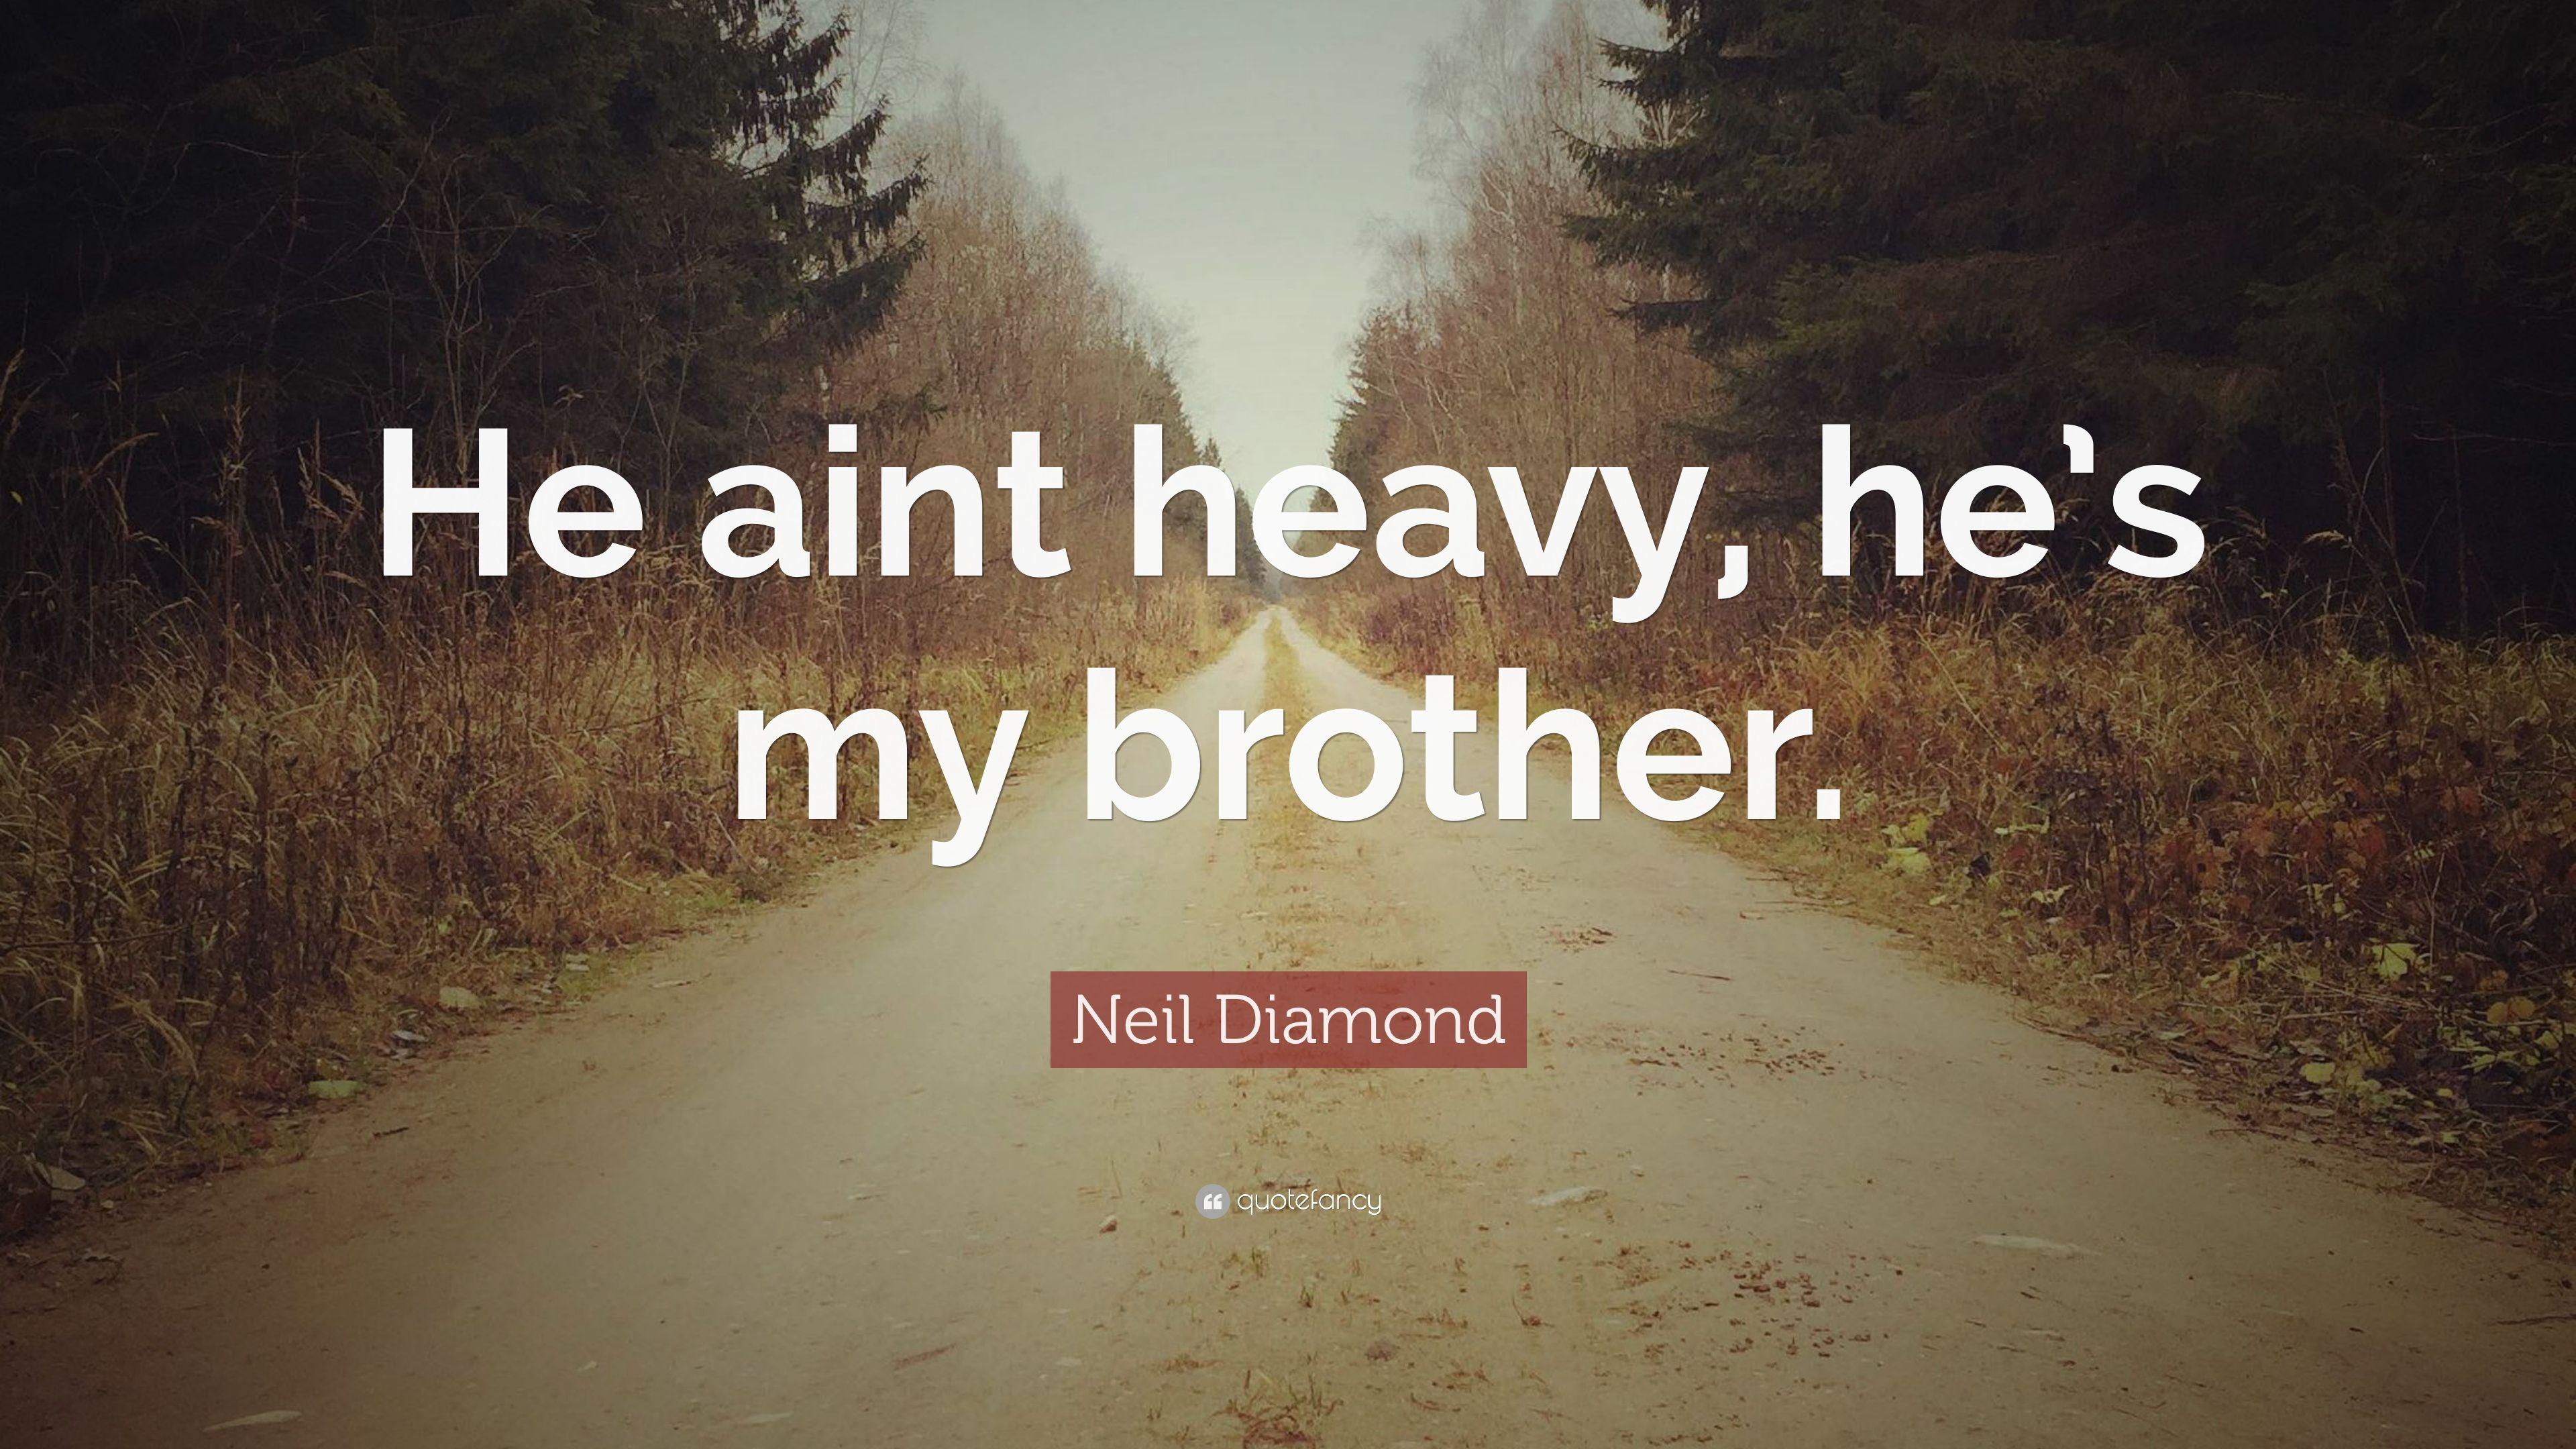 Neil Diamond Quote: “He aint heavy, he's my brother.” 7